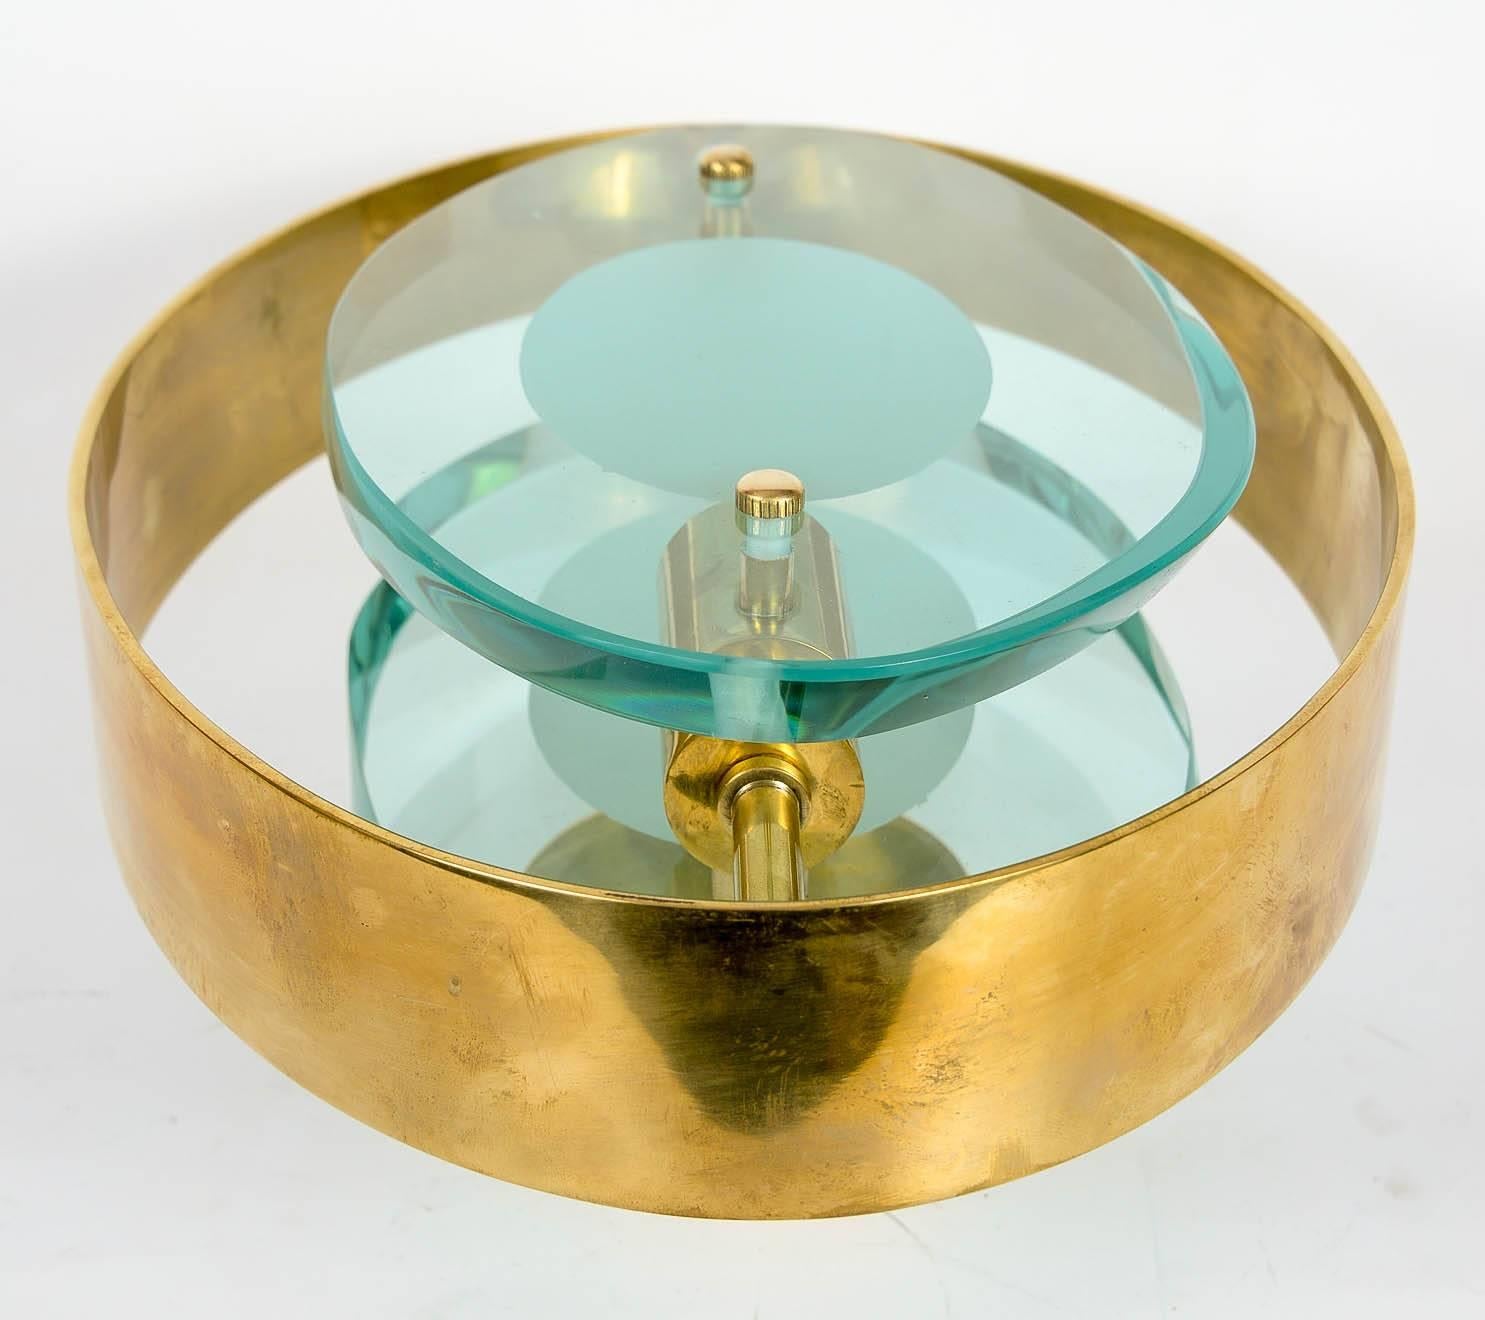 In the style of Fontana Arte, Max Ingrand designed brass and glass wall sconce,
model 2240
Model illustrated in Max Ingrand, Du Verre à Lumière,
page 213.
Mint condition.